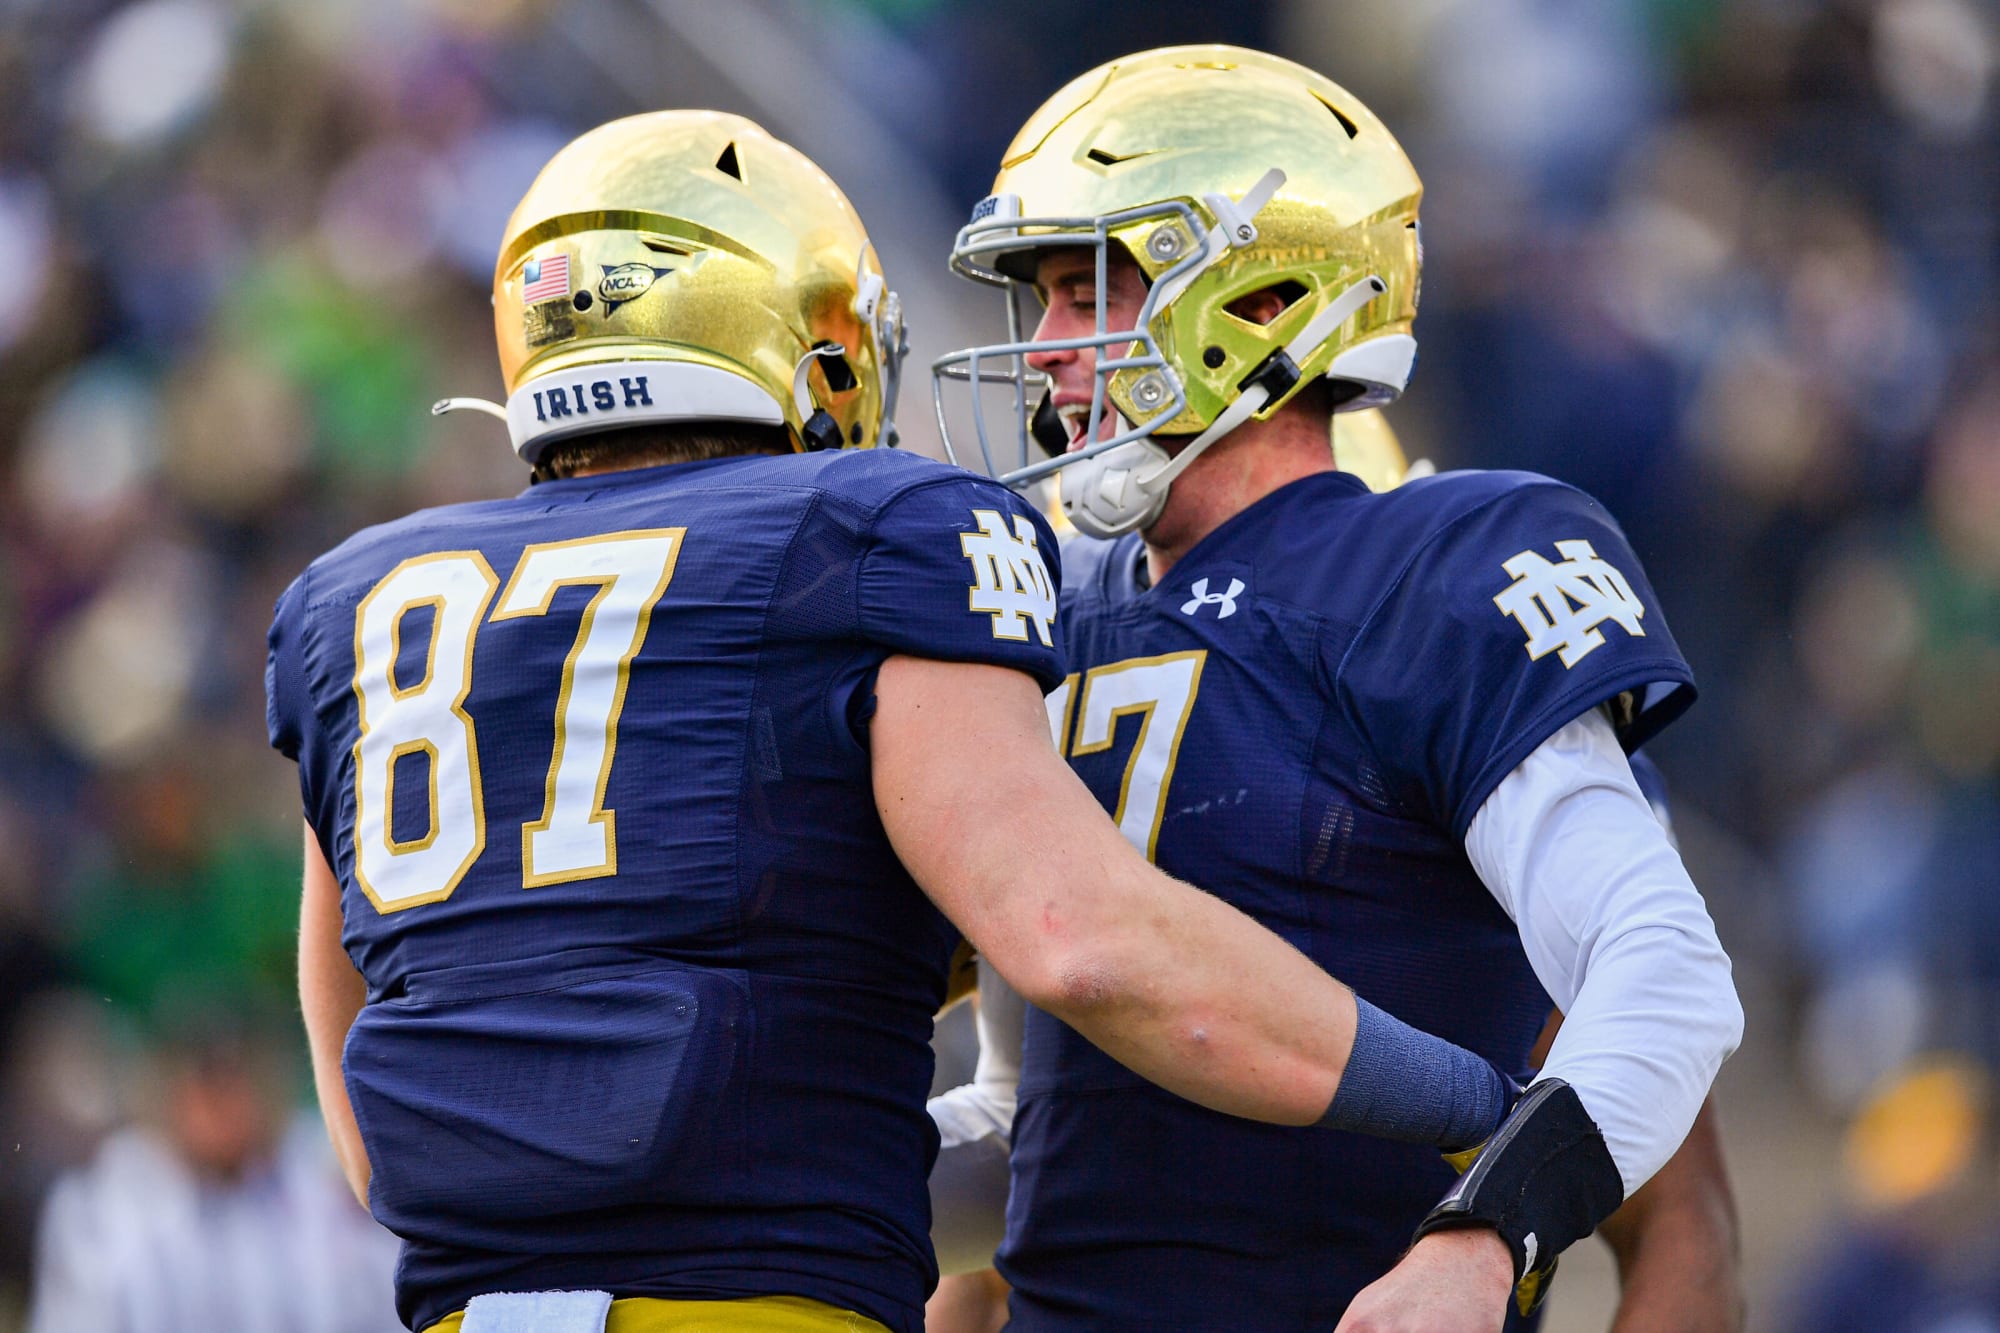 2021 bowl projections Notre Dame projected to play in Peach Bowl vs Pitt